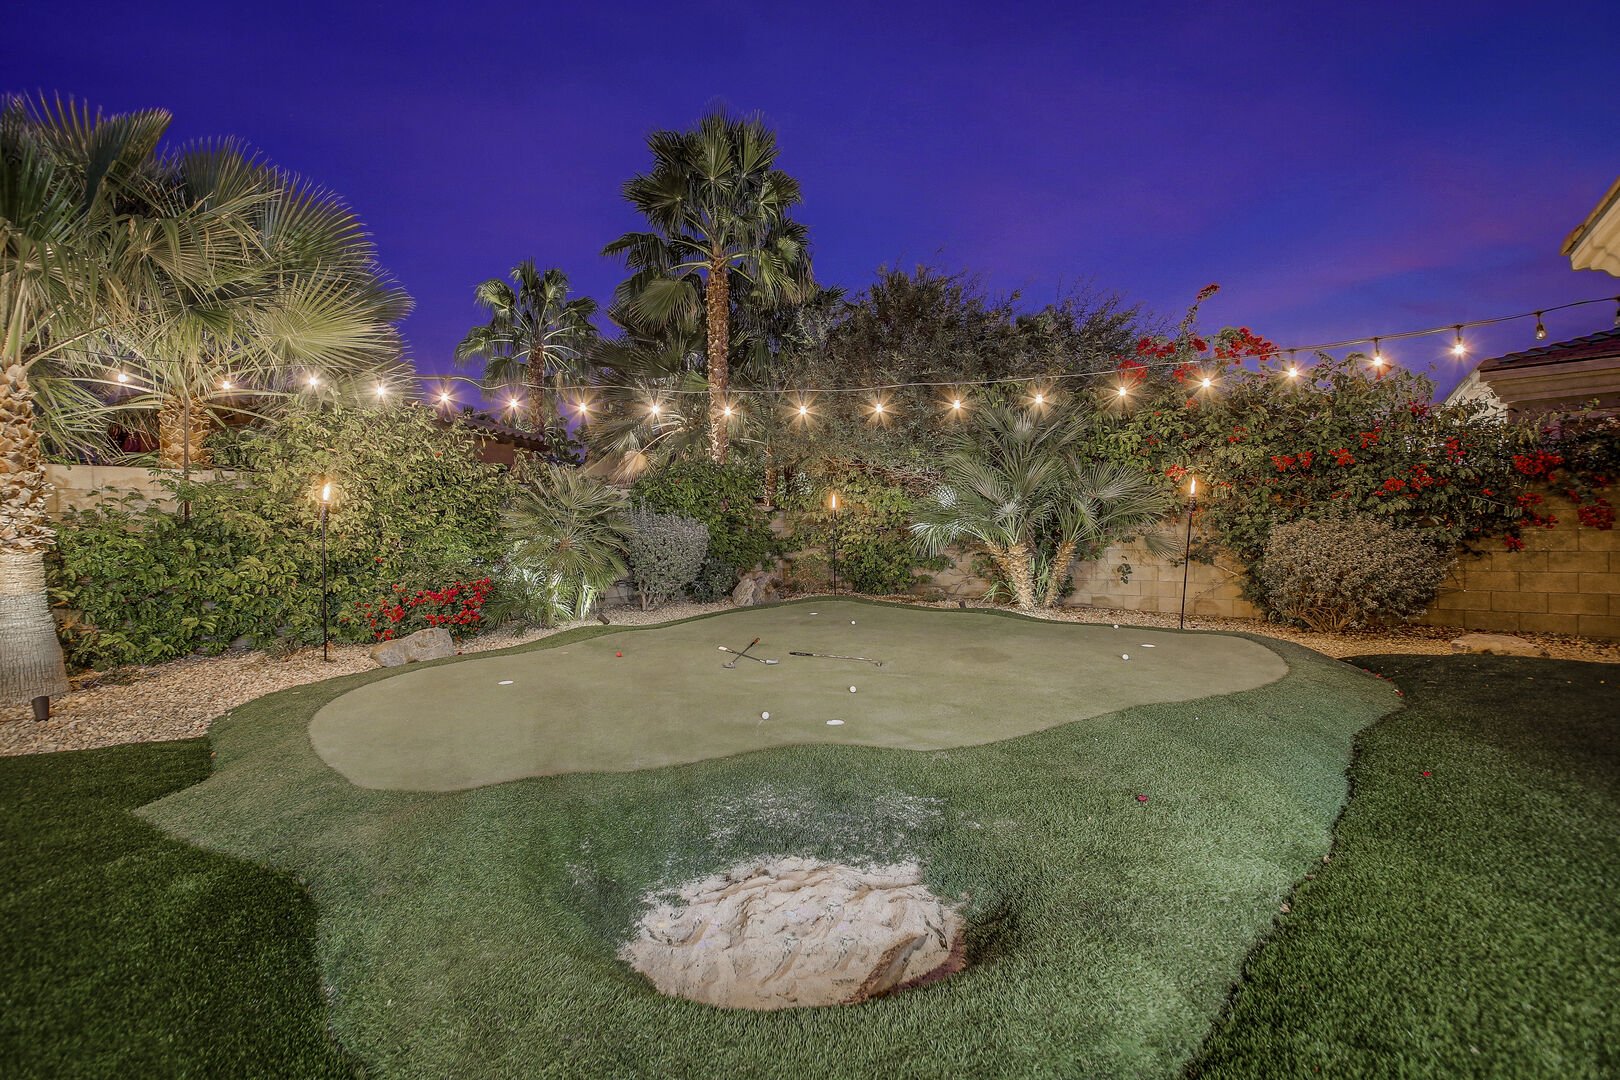 Show off your skills on the putting green! Putting green comes complete with a sand trap.